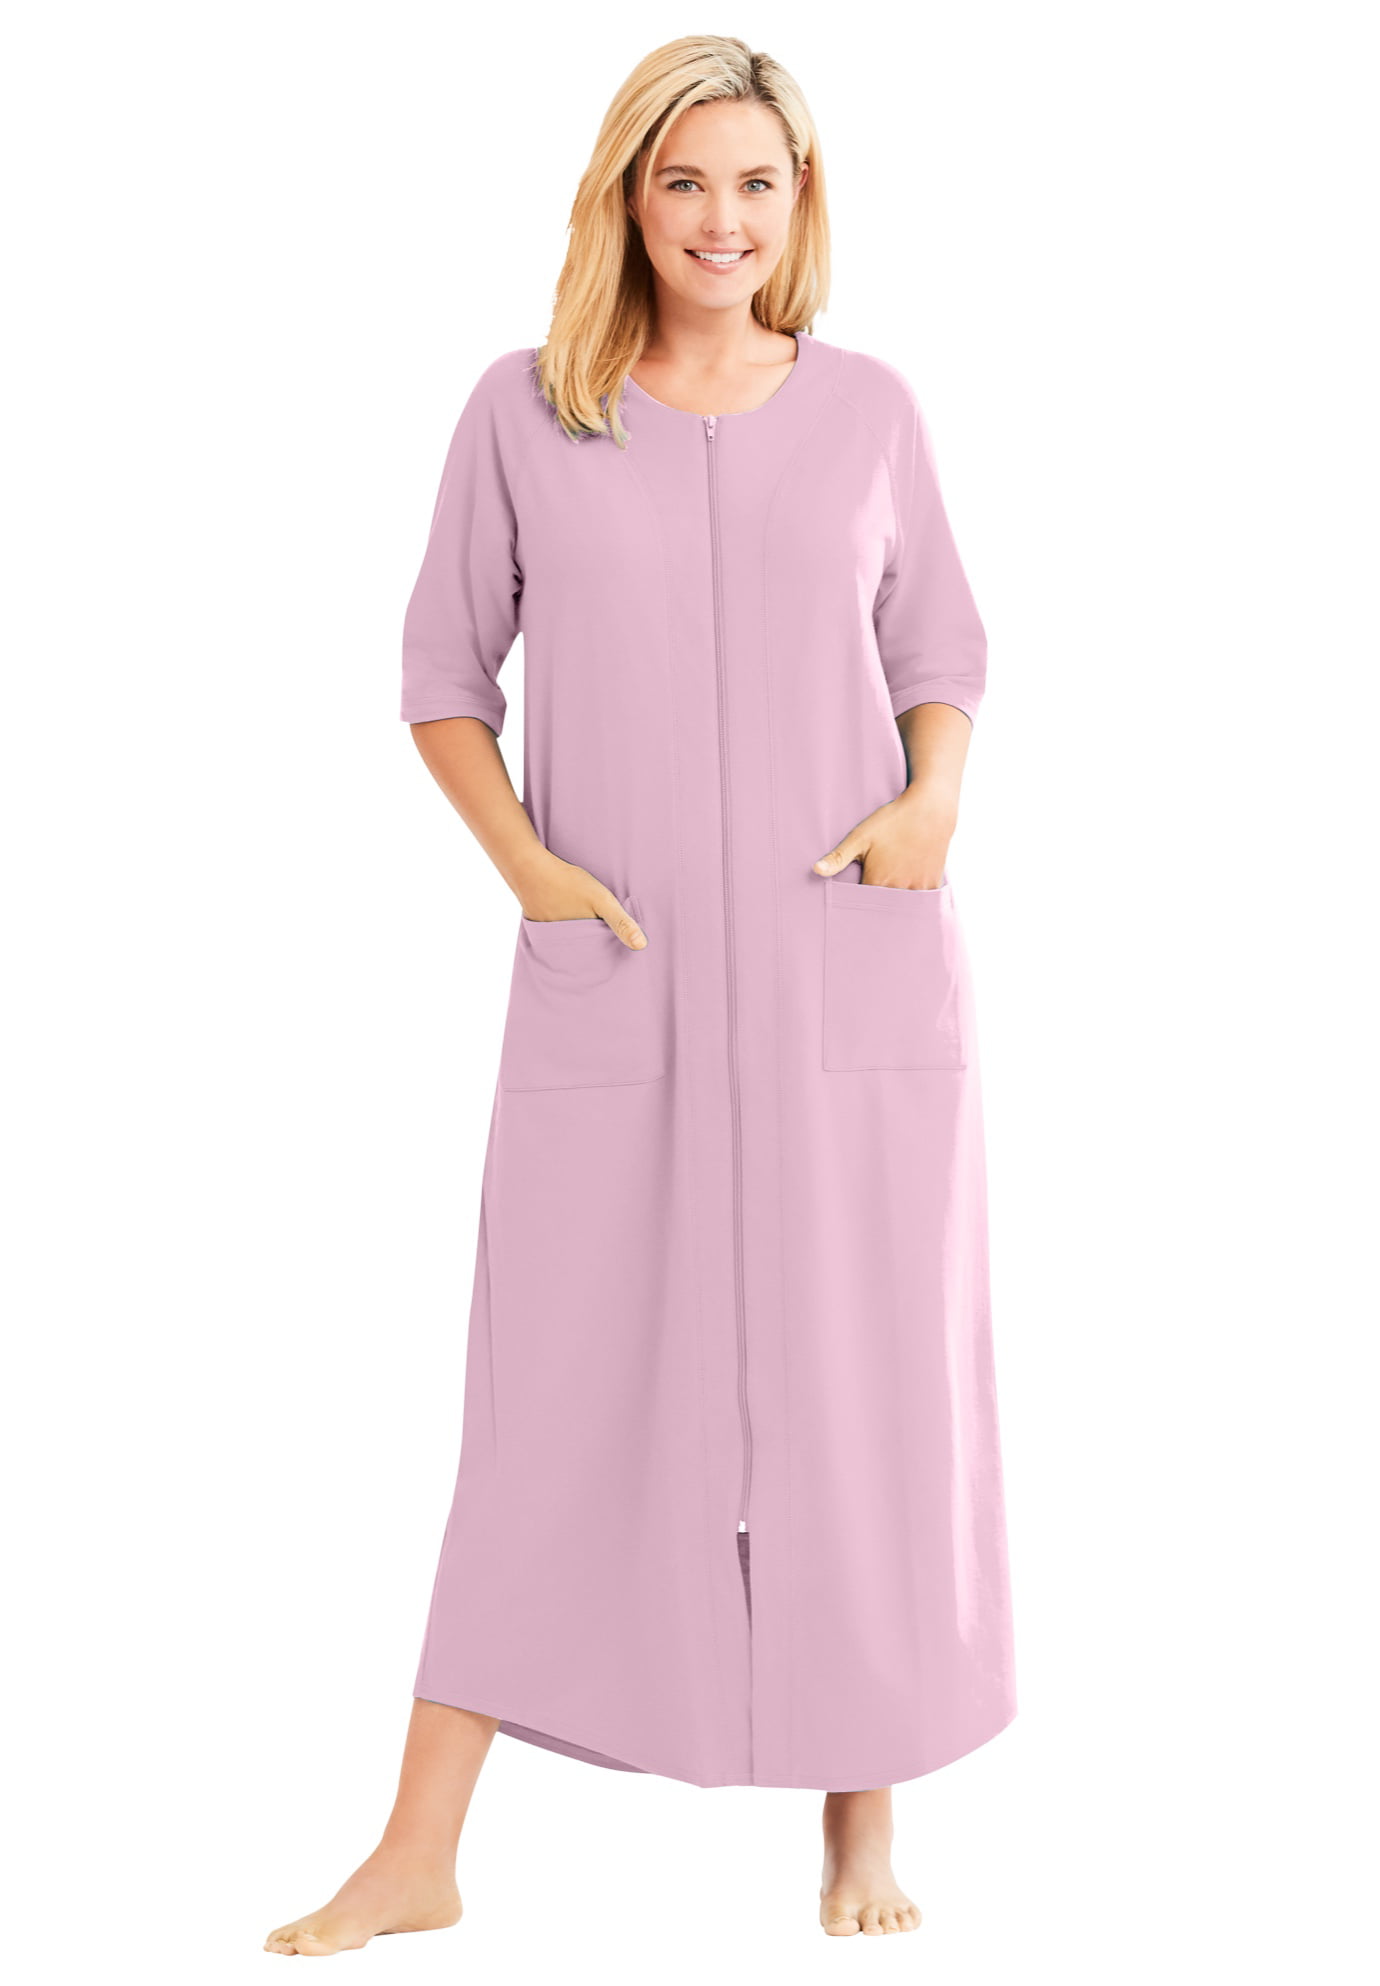 Dreams & Co Womens Plus Size Long French Terry Zip-Front Robe